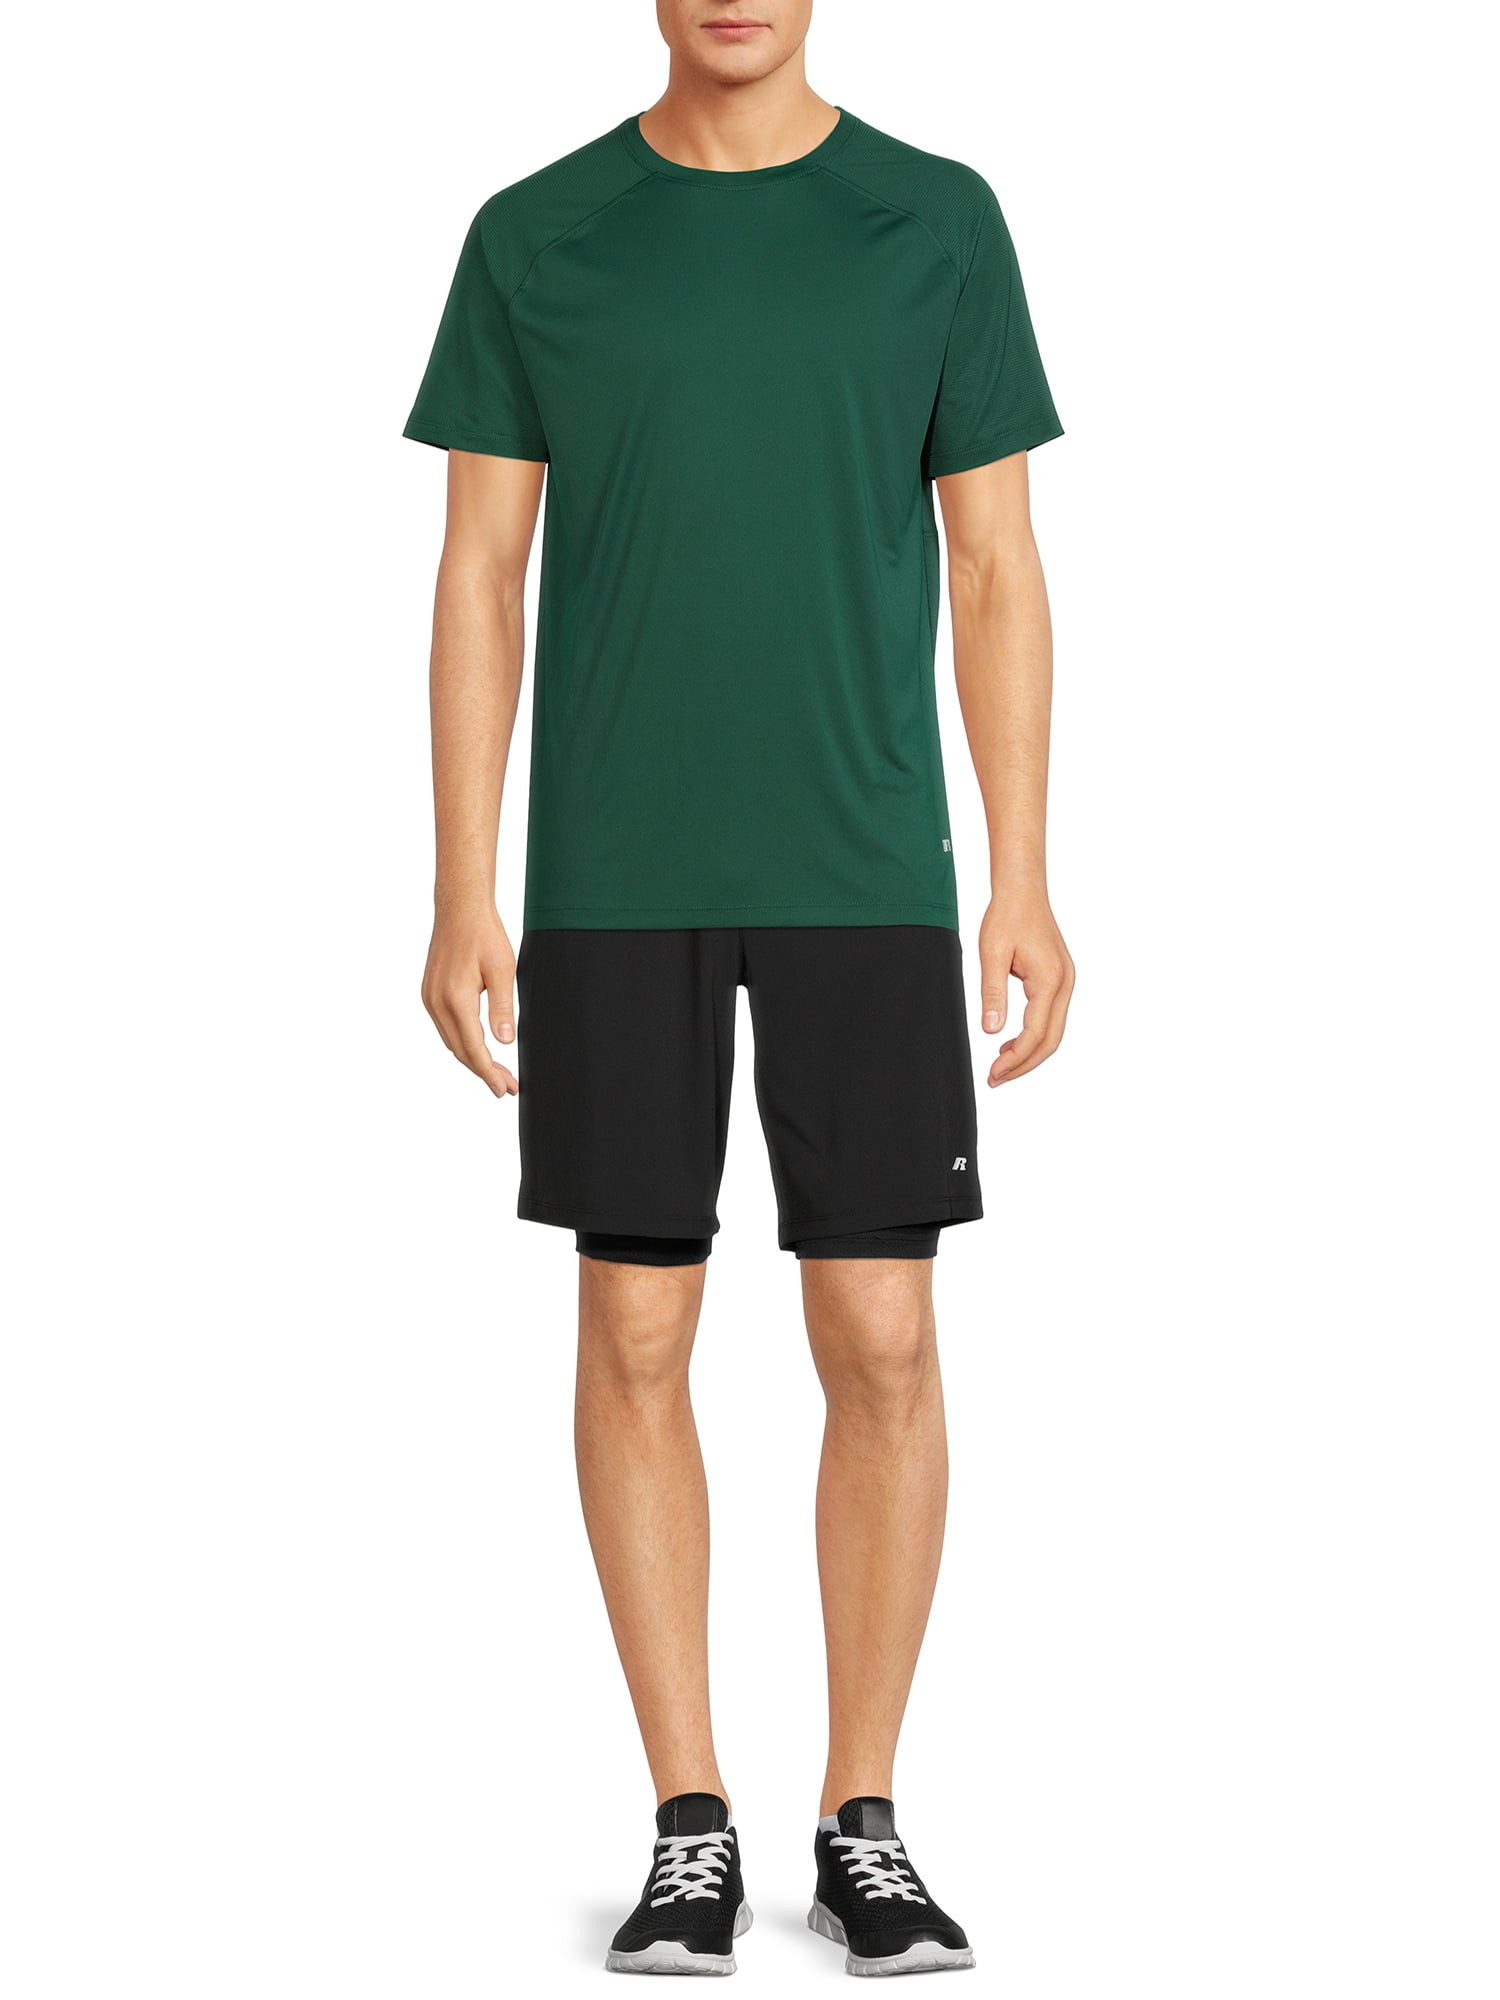 Russell Men's and Big Men's Active 2-in-1 Woven Shorts with Liner